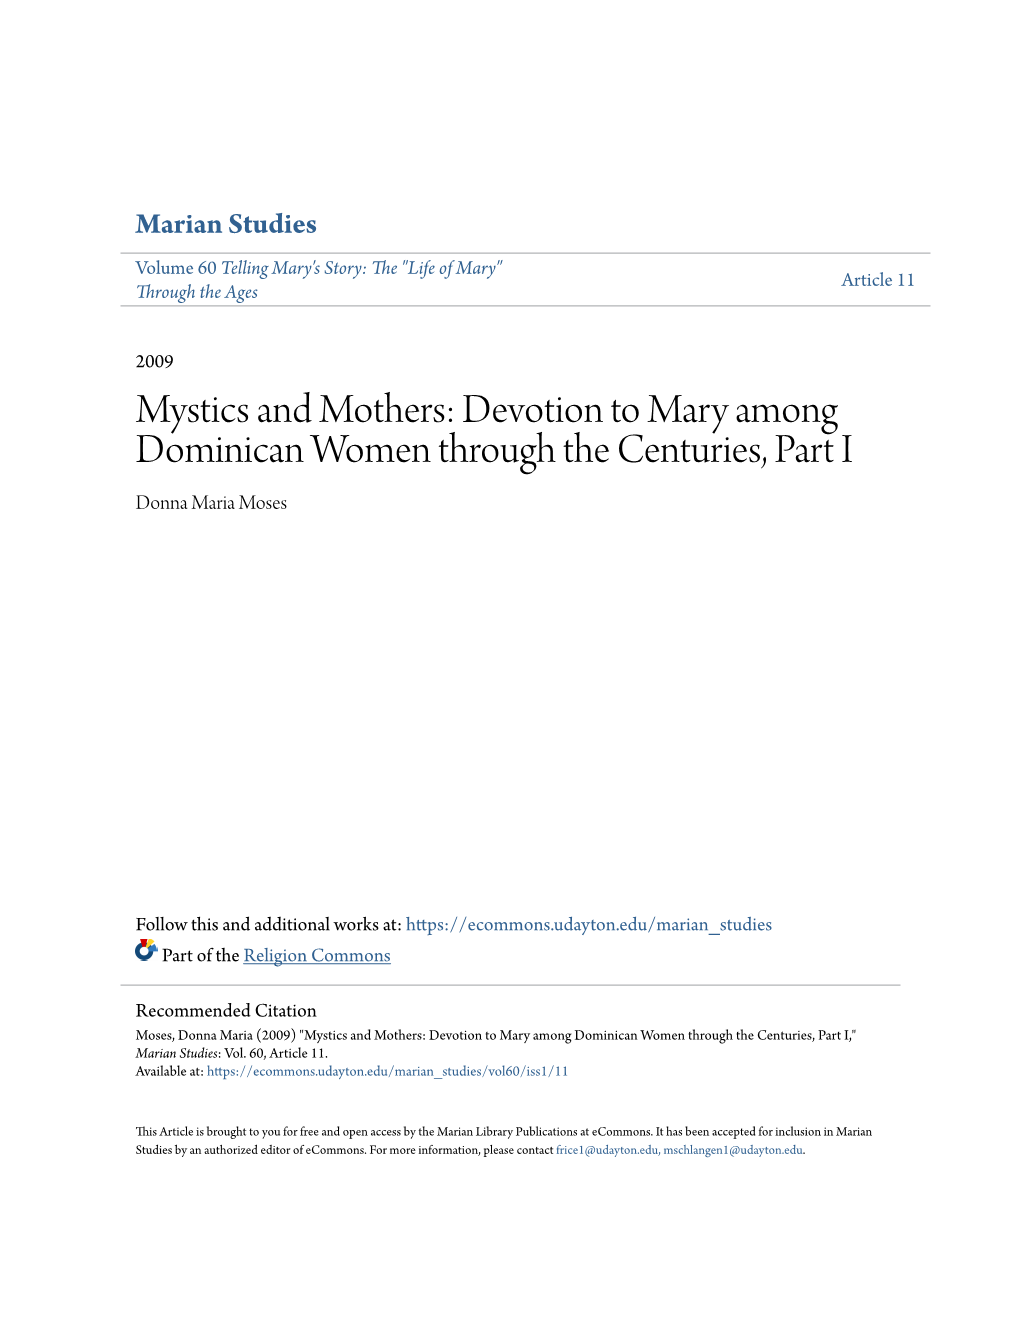 Mystics and Mothers: Devotion to Mary Among Dominican Women Through the Centuries, Part I Donna Maria Moses